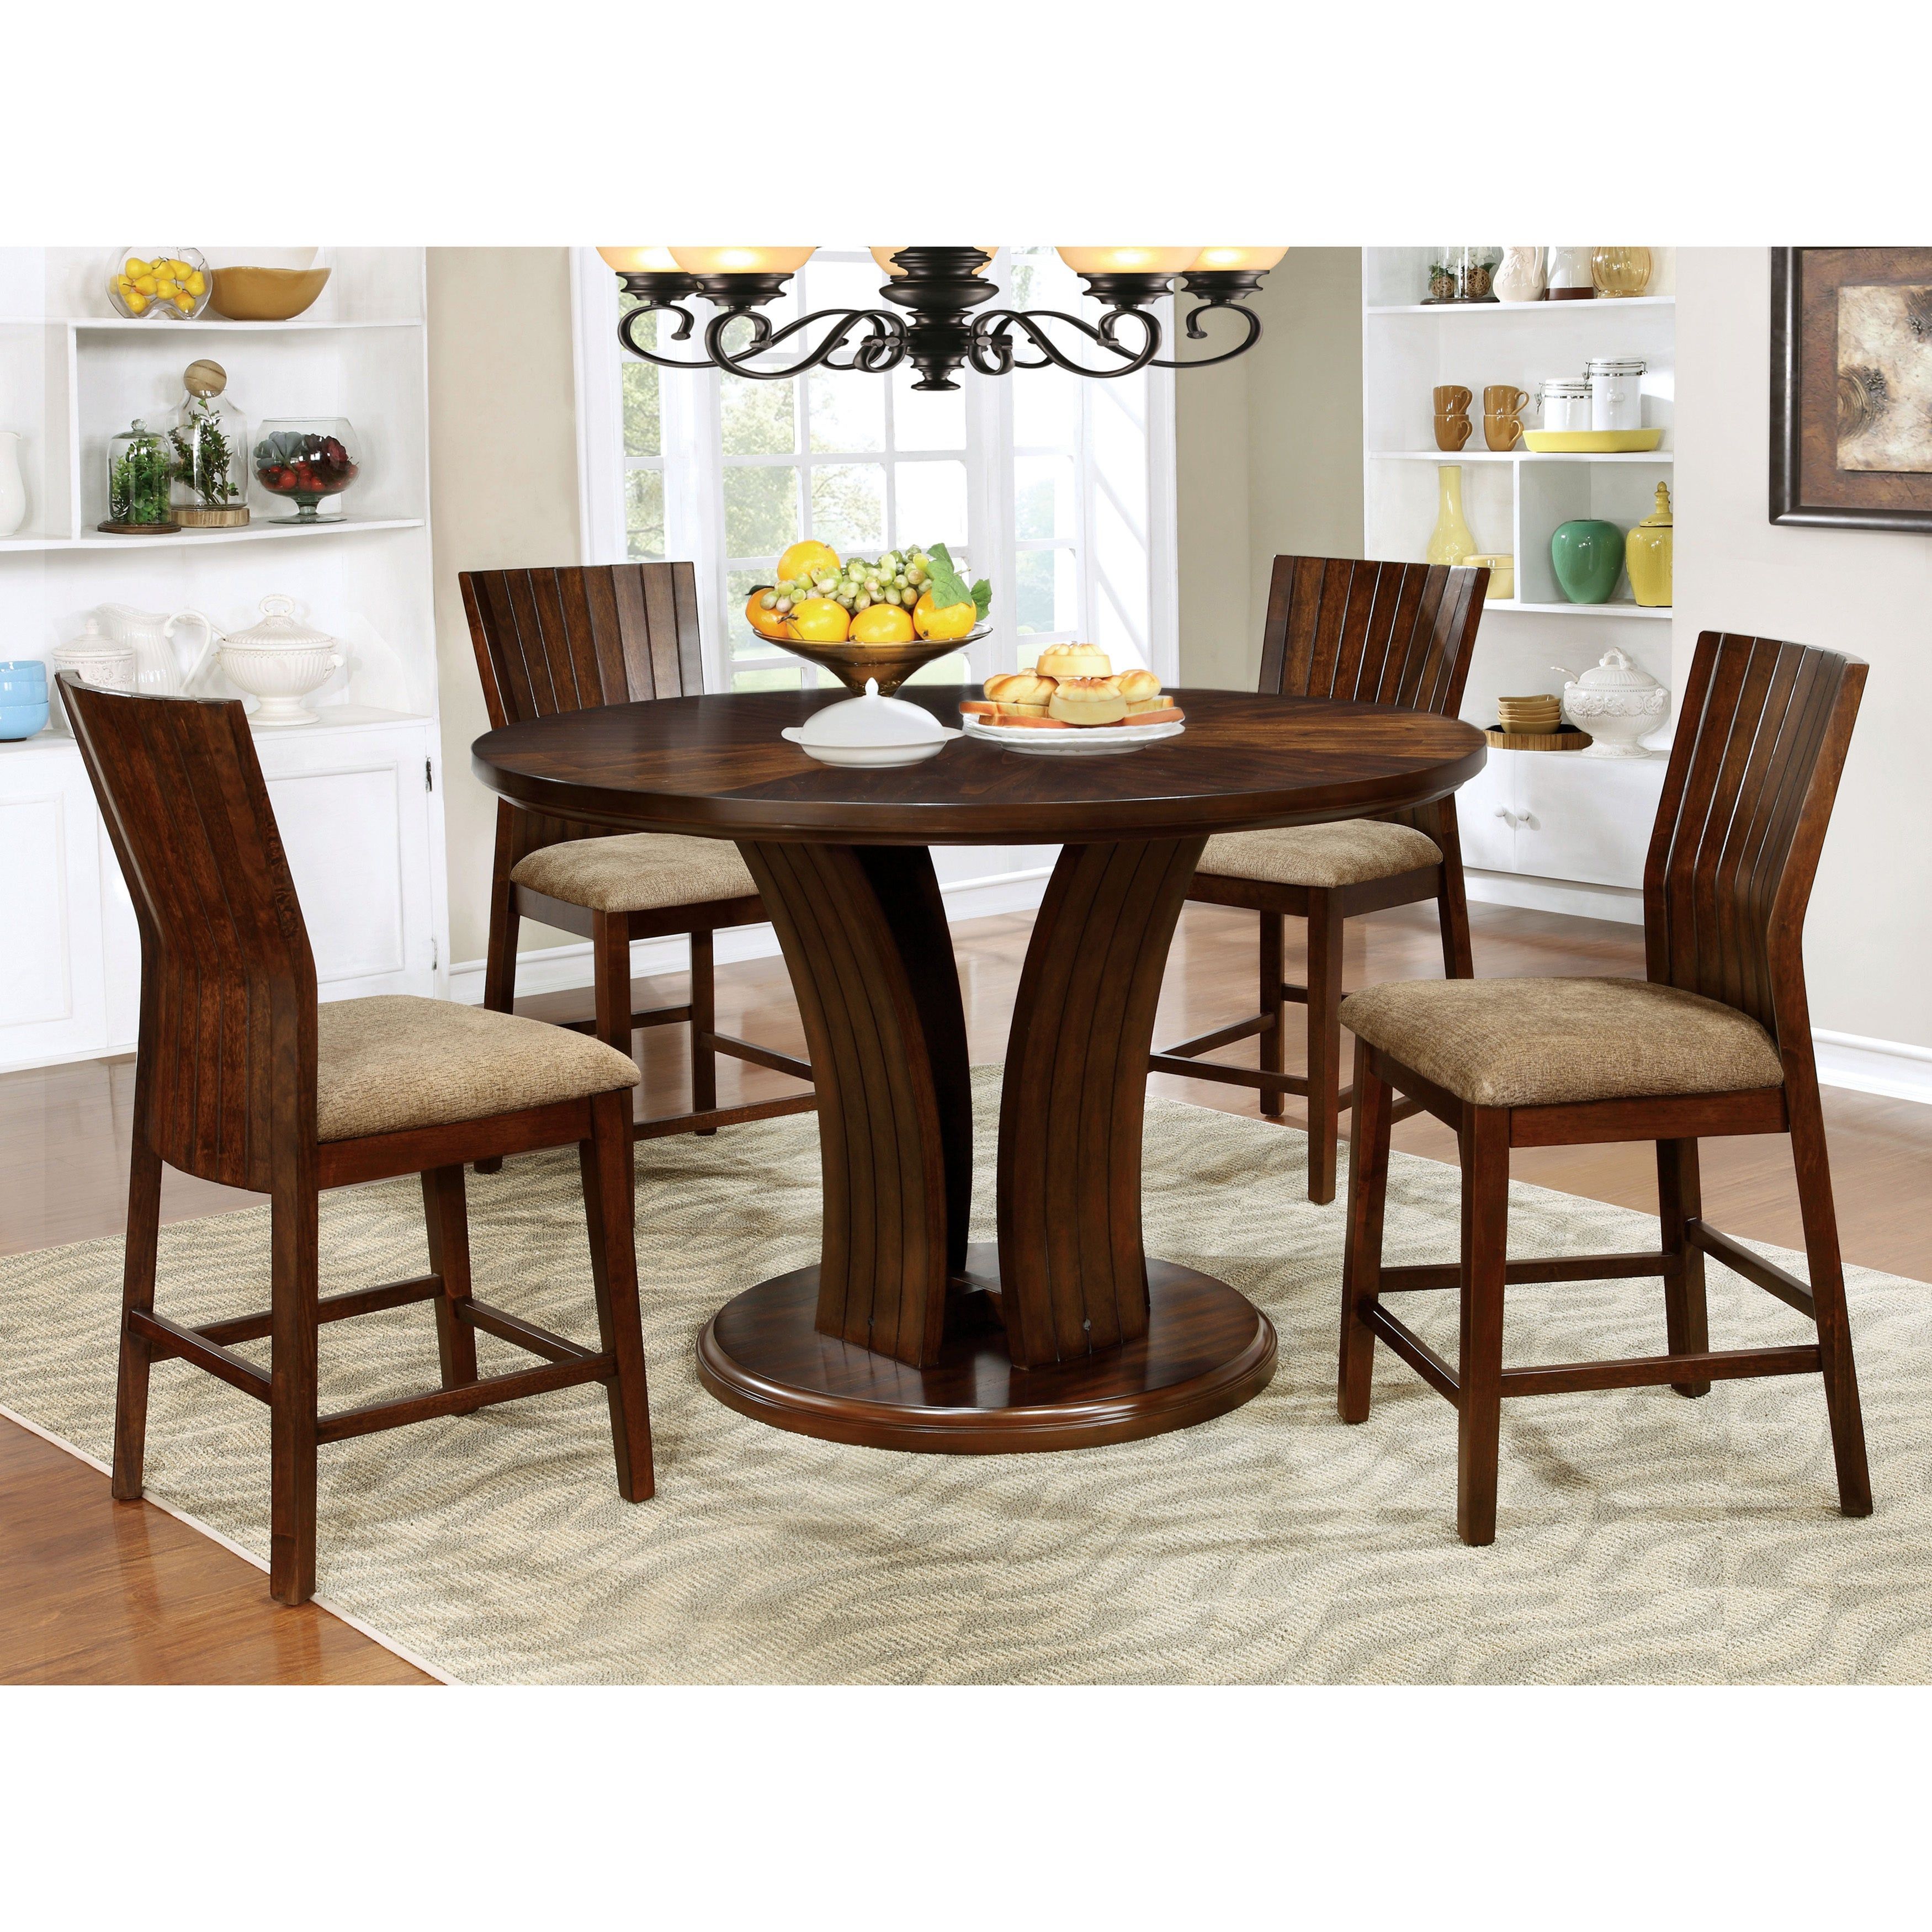 Carbon Loft O'brien Flared Pedestal Dark Oak Counter Height Dining Table Pertaining To Latest Biggs 5 Piece Counter Height Solid Wood Dining Sets (Set Of 5) (View 15 of 20)